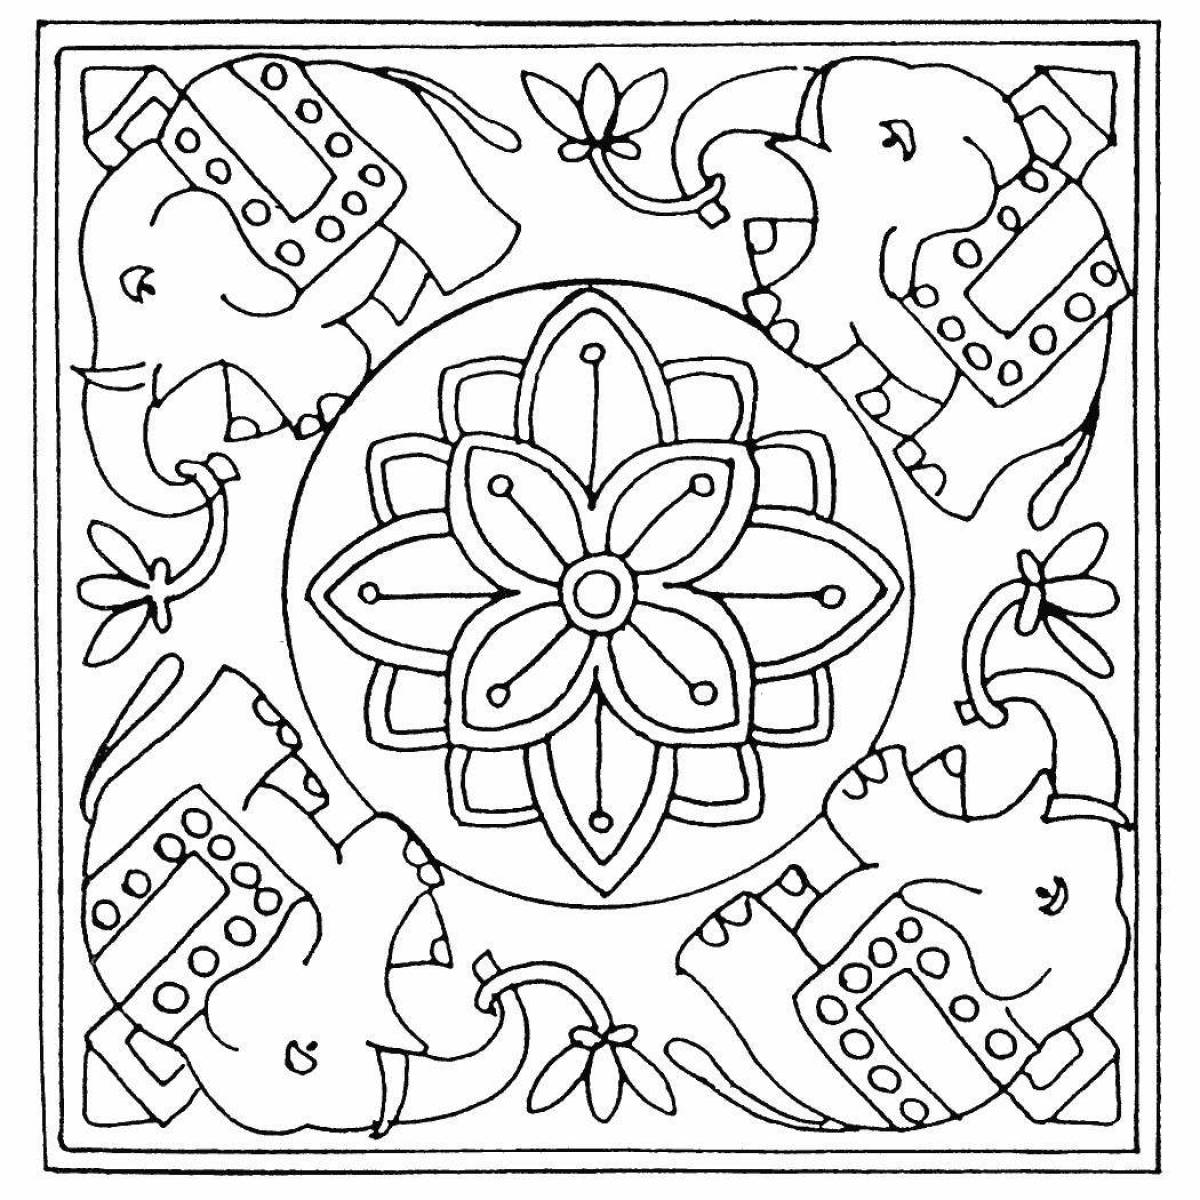 Colorful carpet coloring book for kids